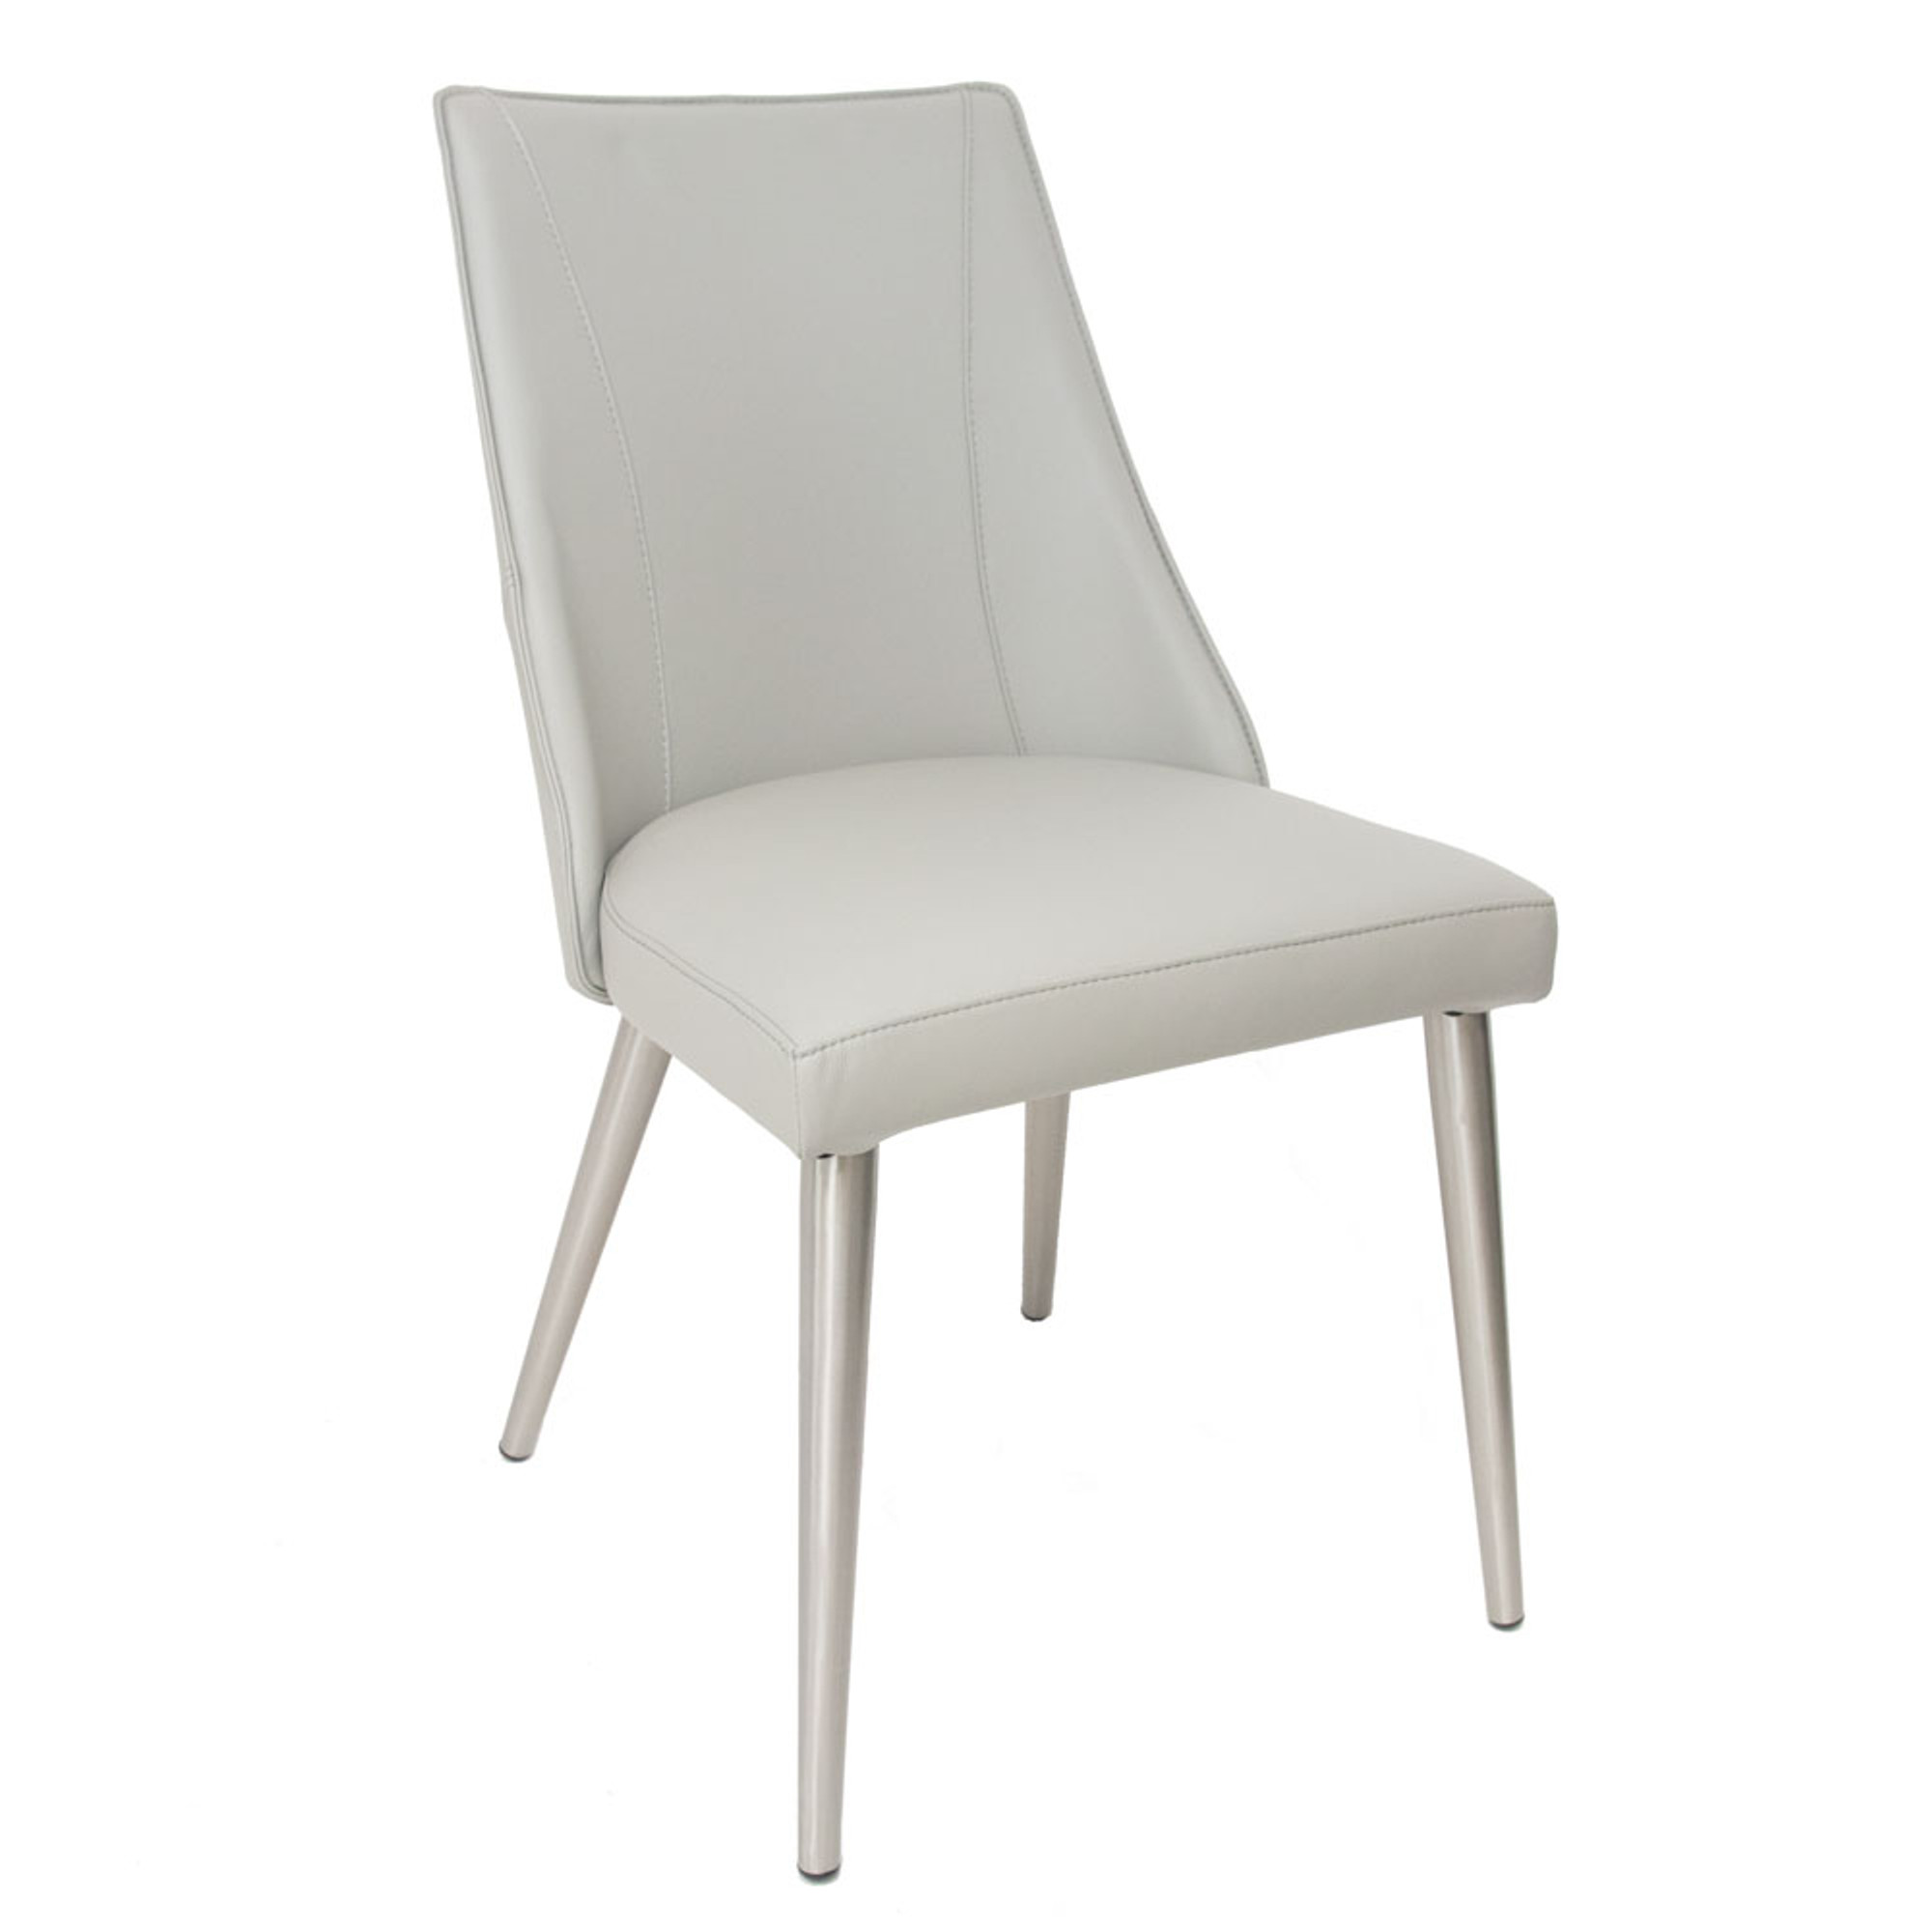 light grey leather upholstered chair, with silver toned legs